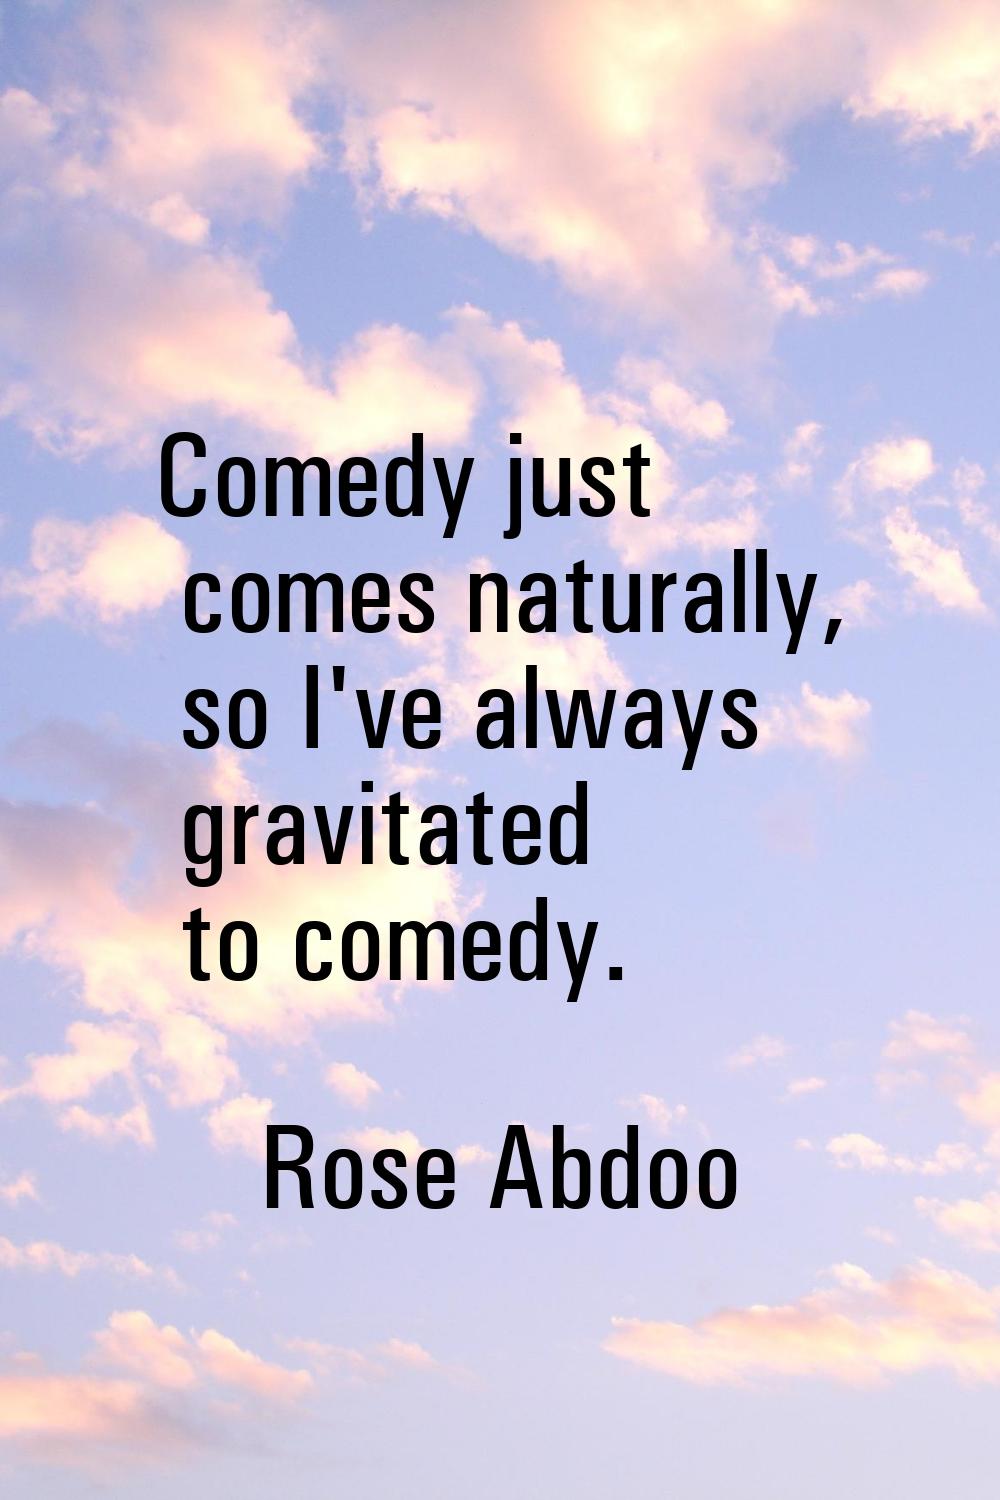 Comedy just comes naturally, so I've always gravitated to comedy.